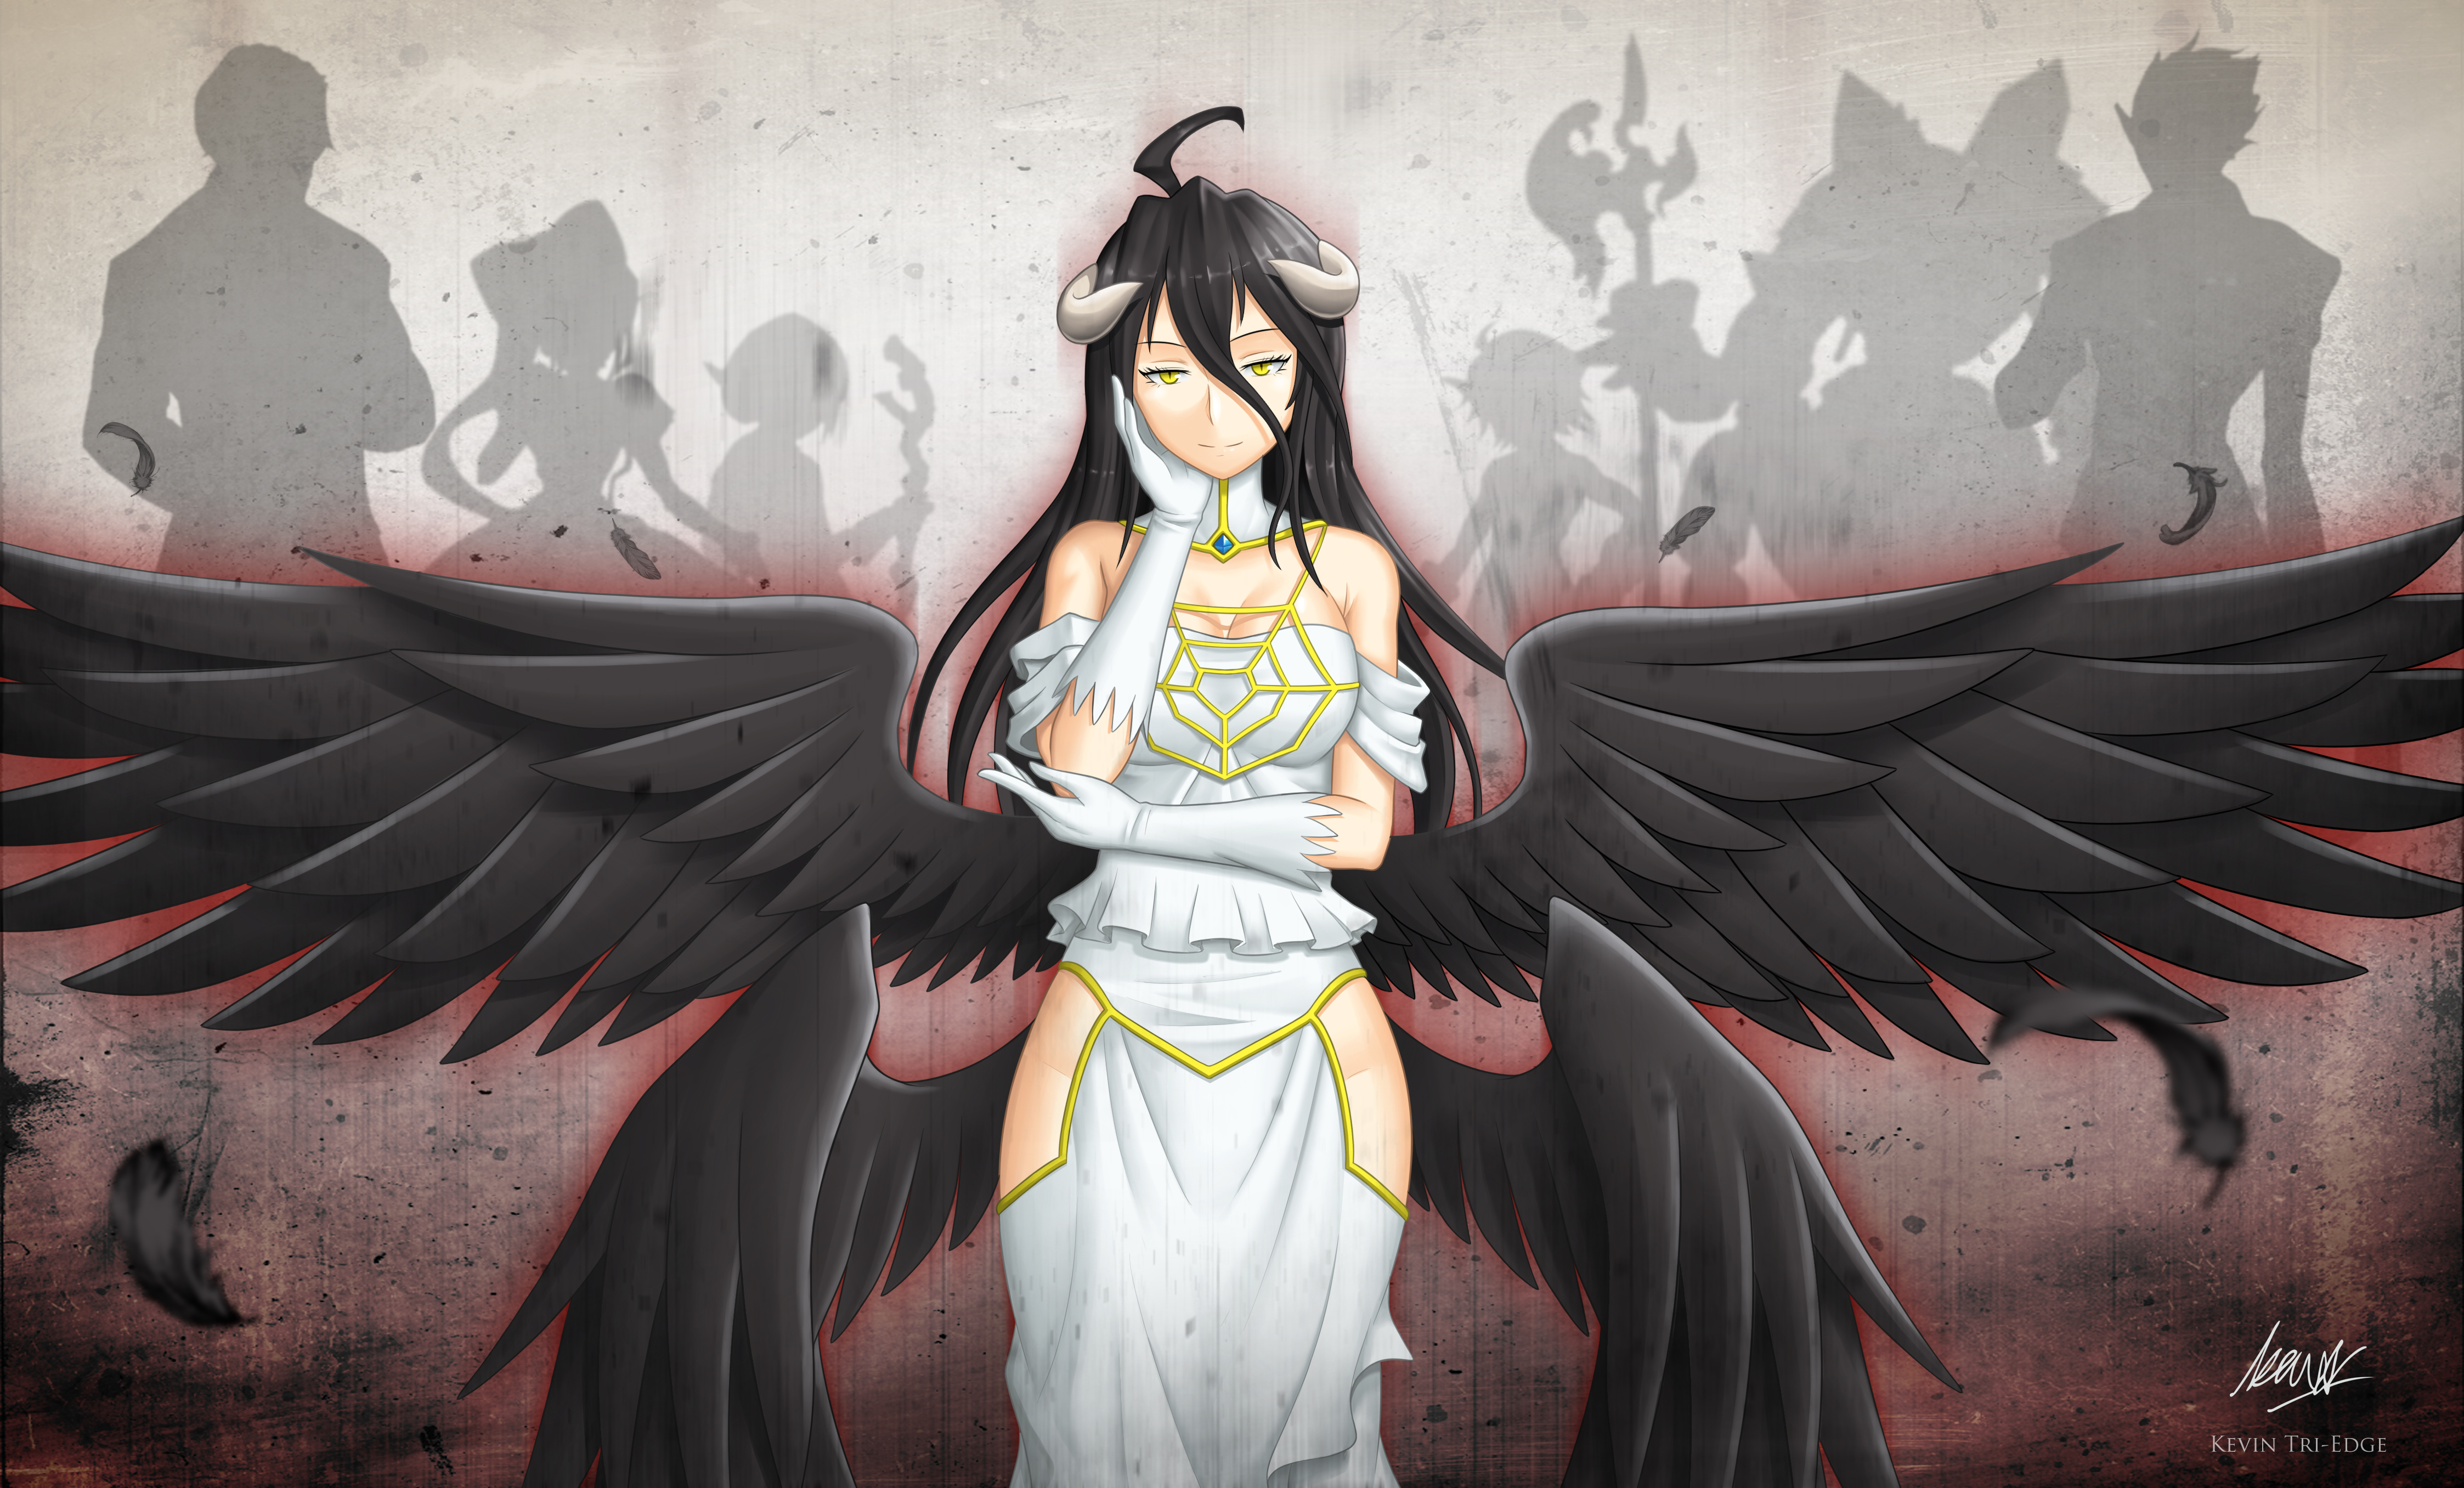 Wallpaper ID 322287  Anime Overlord Phone Wallpaper Albedo Overlord  1440x2960 free download